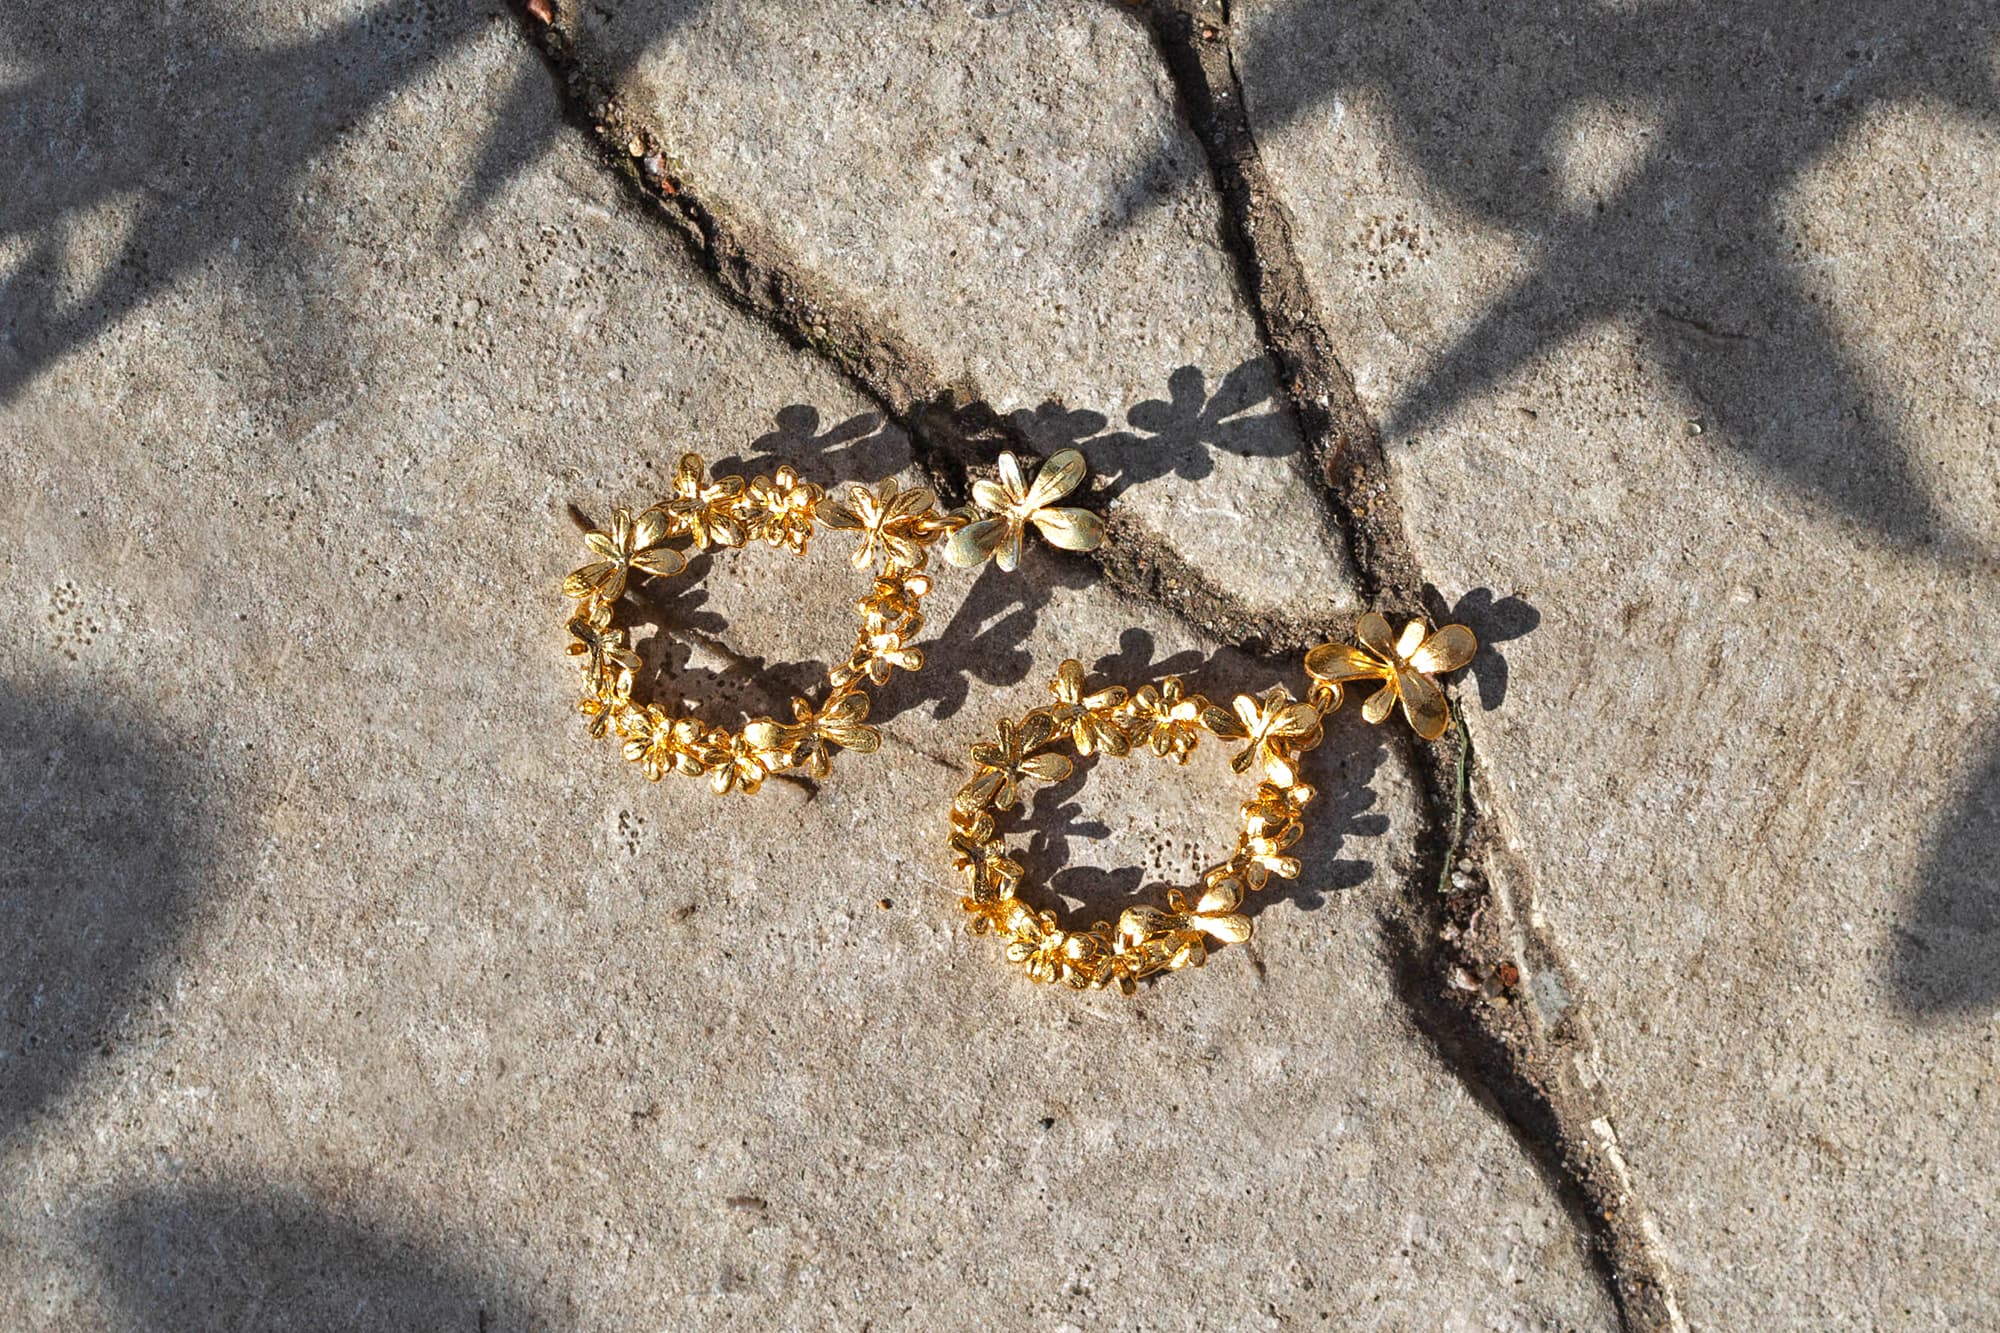 Sprouting Rosette Teardrop Earrings silver 22ct fairmined gold plate in crack in pavement